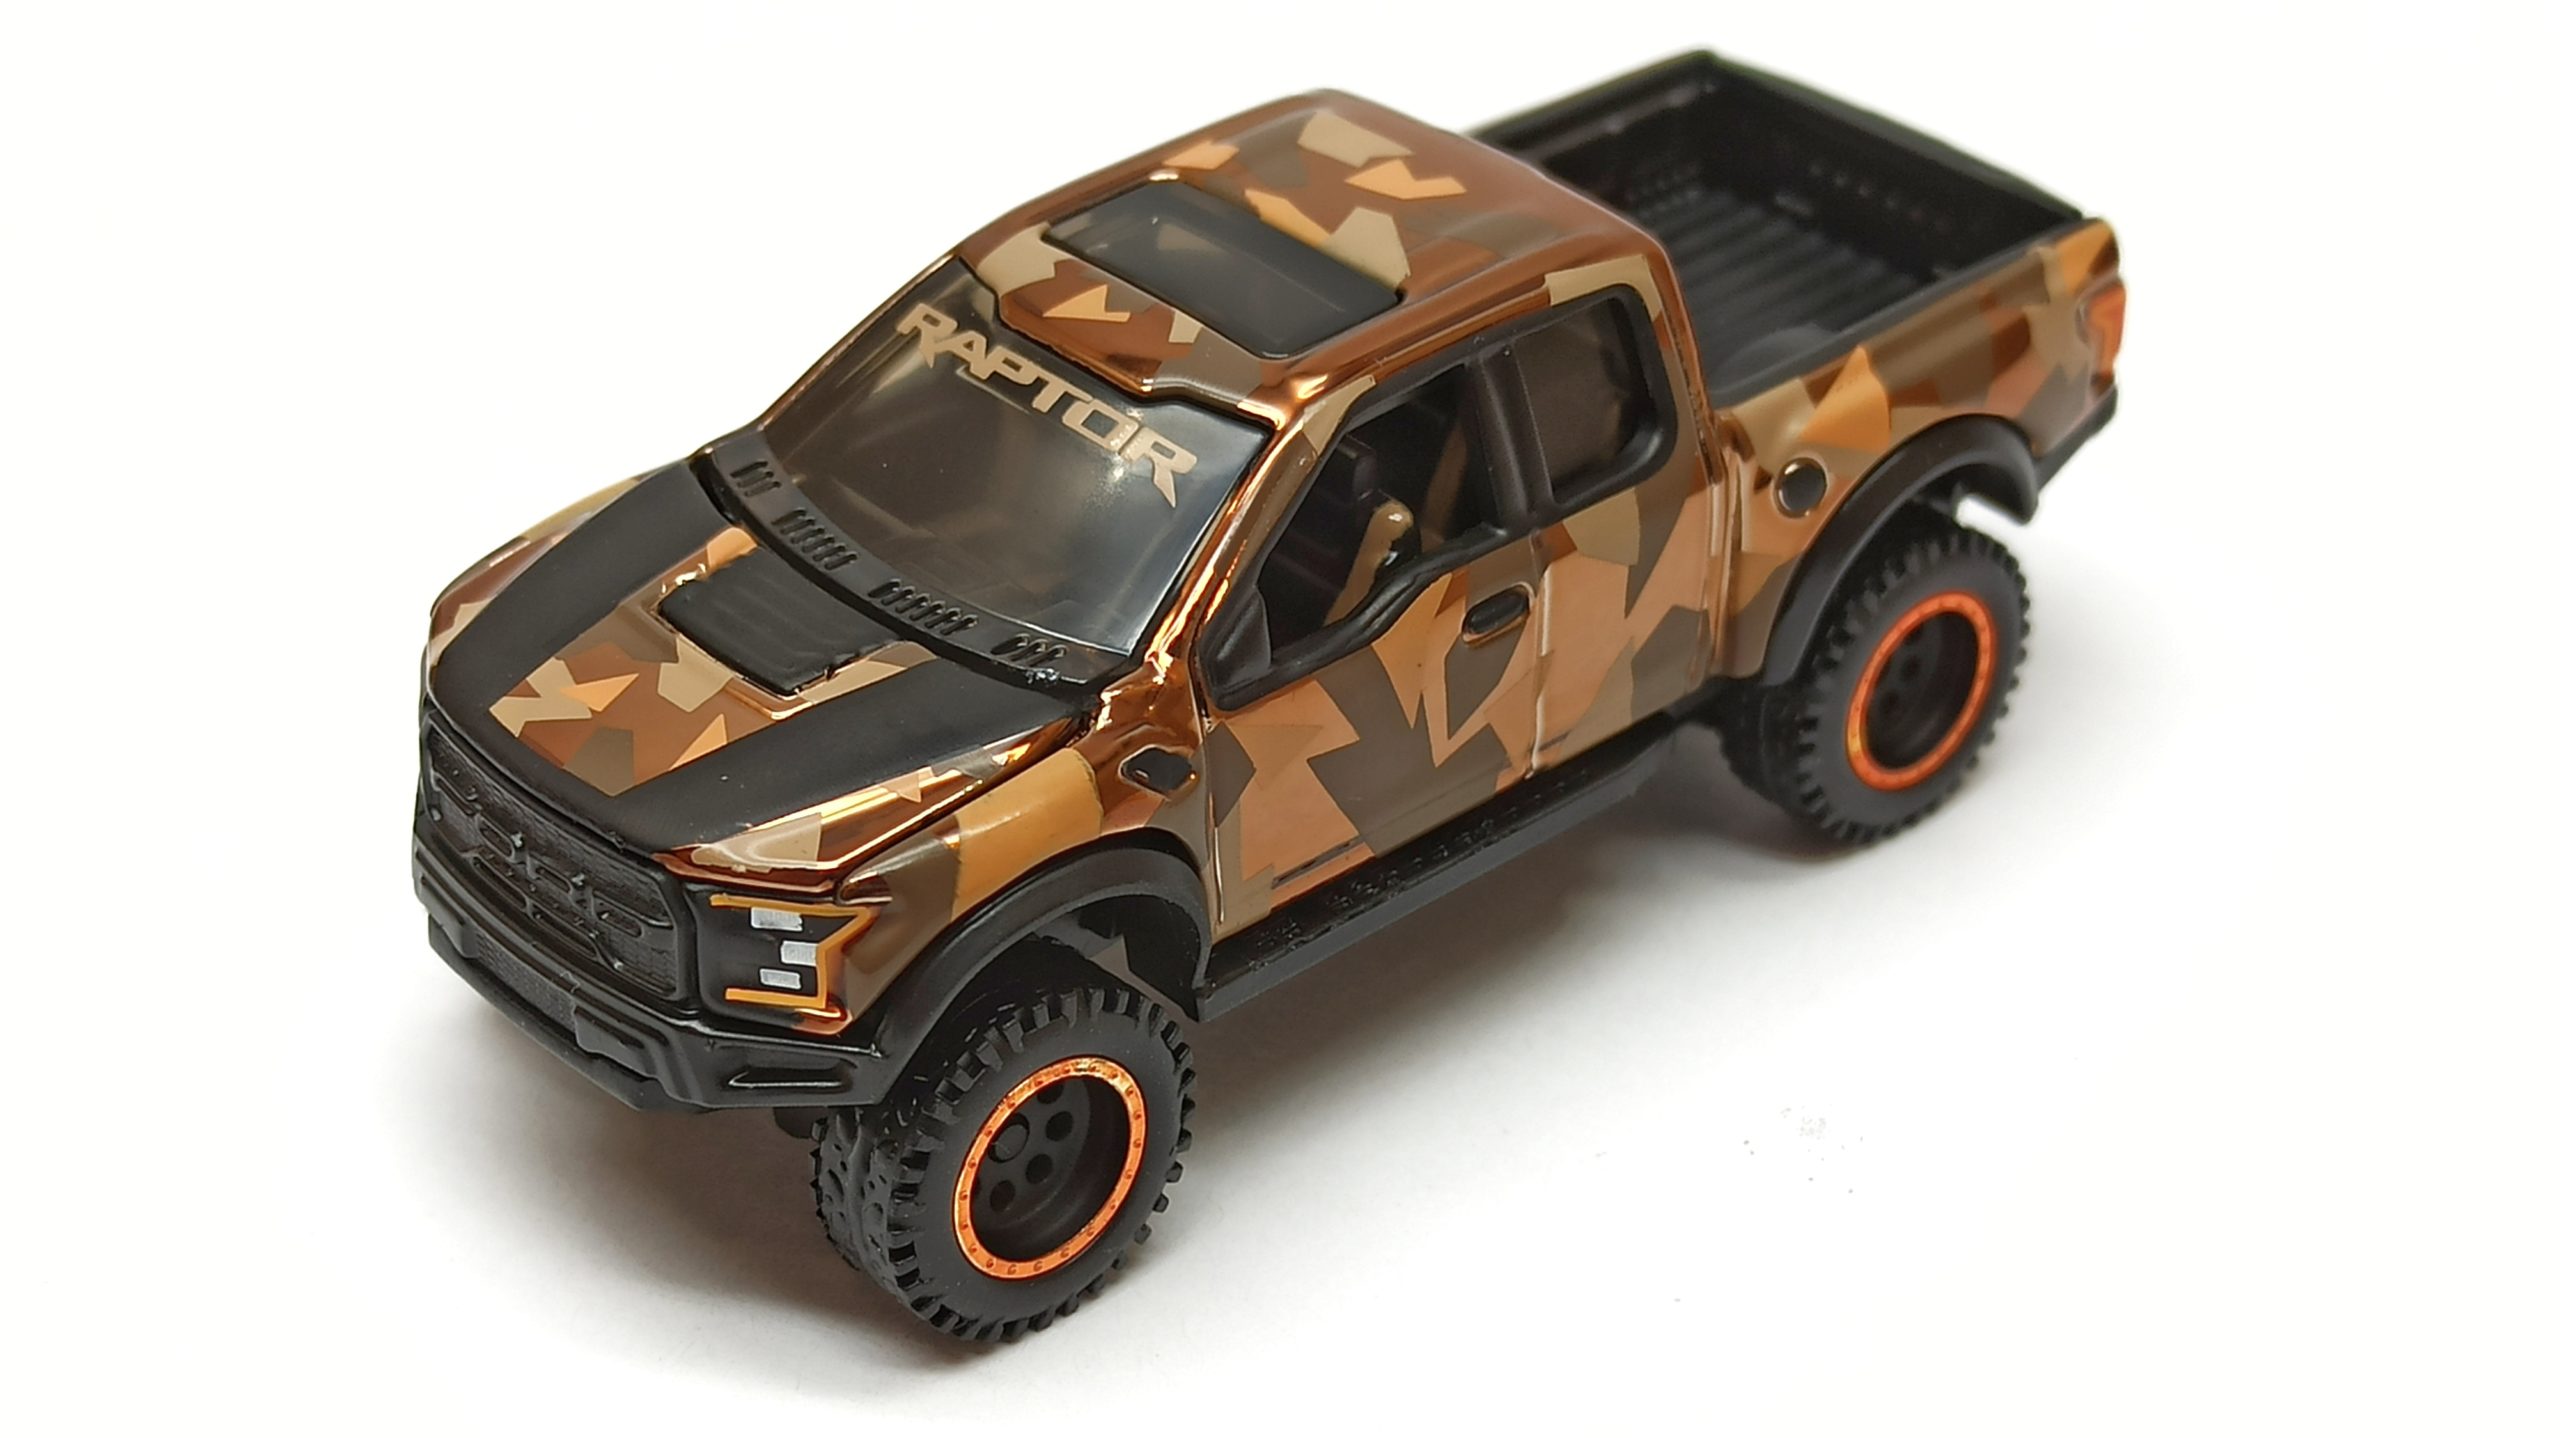 Hot Wheels '17 Ford F-150 Raptor (HCK31) 2021 RLC Exclusive (1 of 25.000) spectraflame light brown (desert camo pattern)